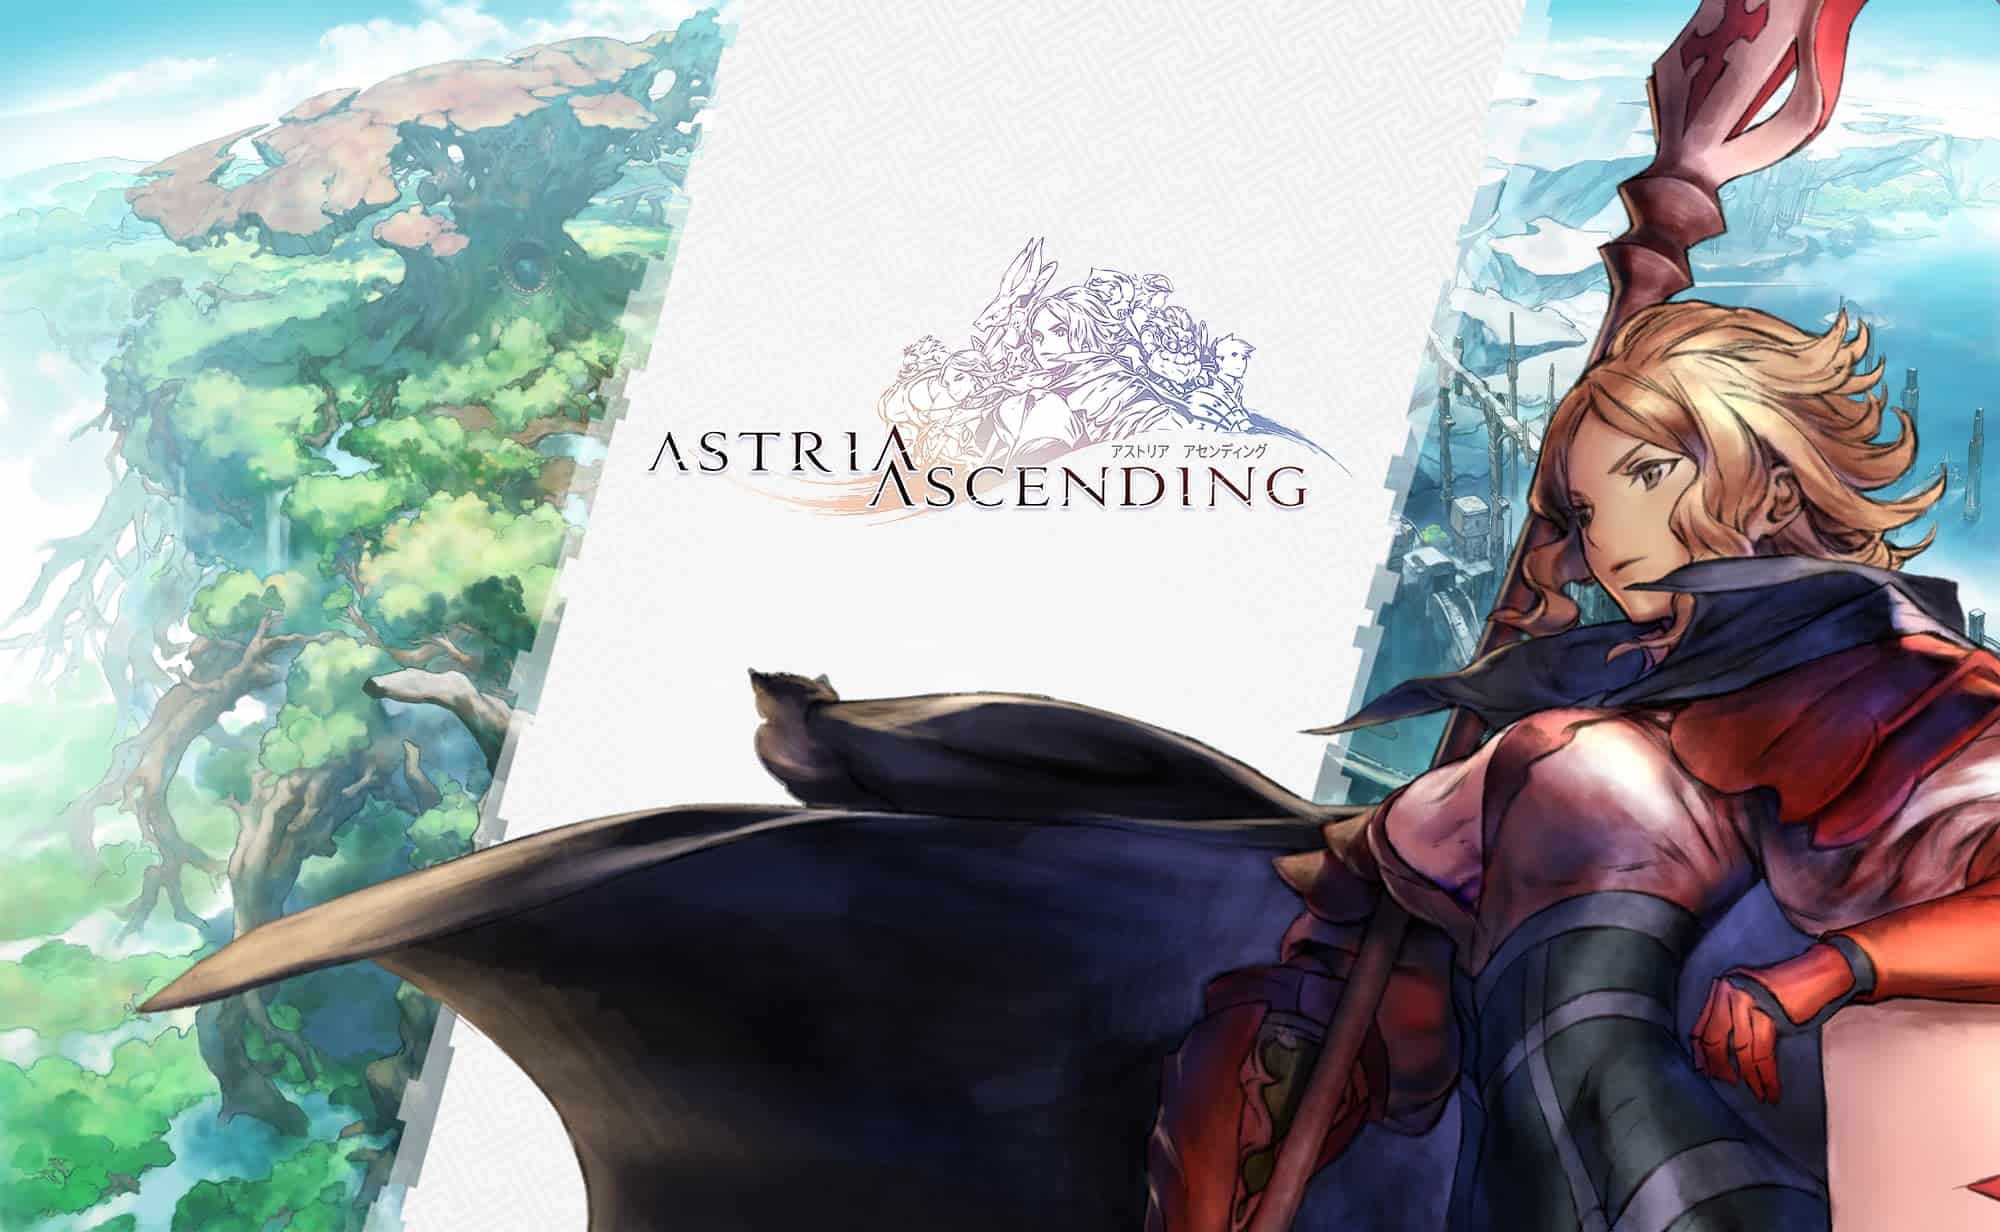 Astria Ascending characters